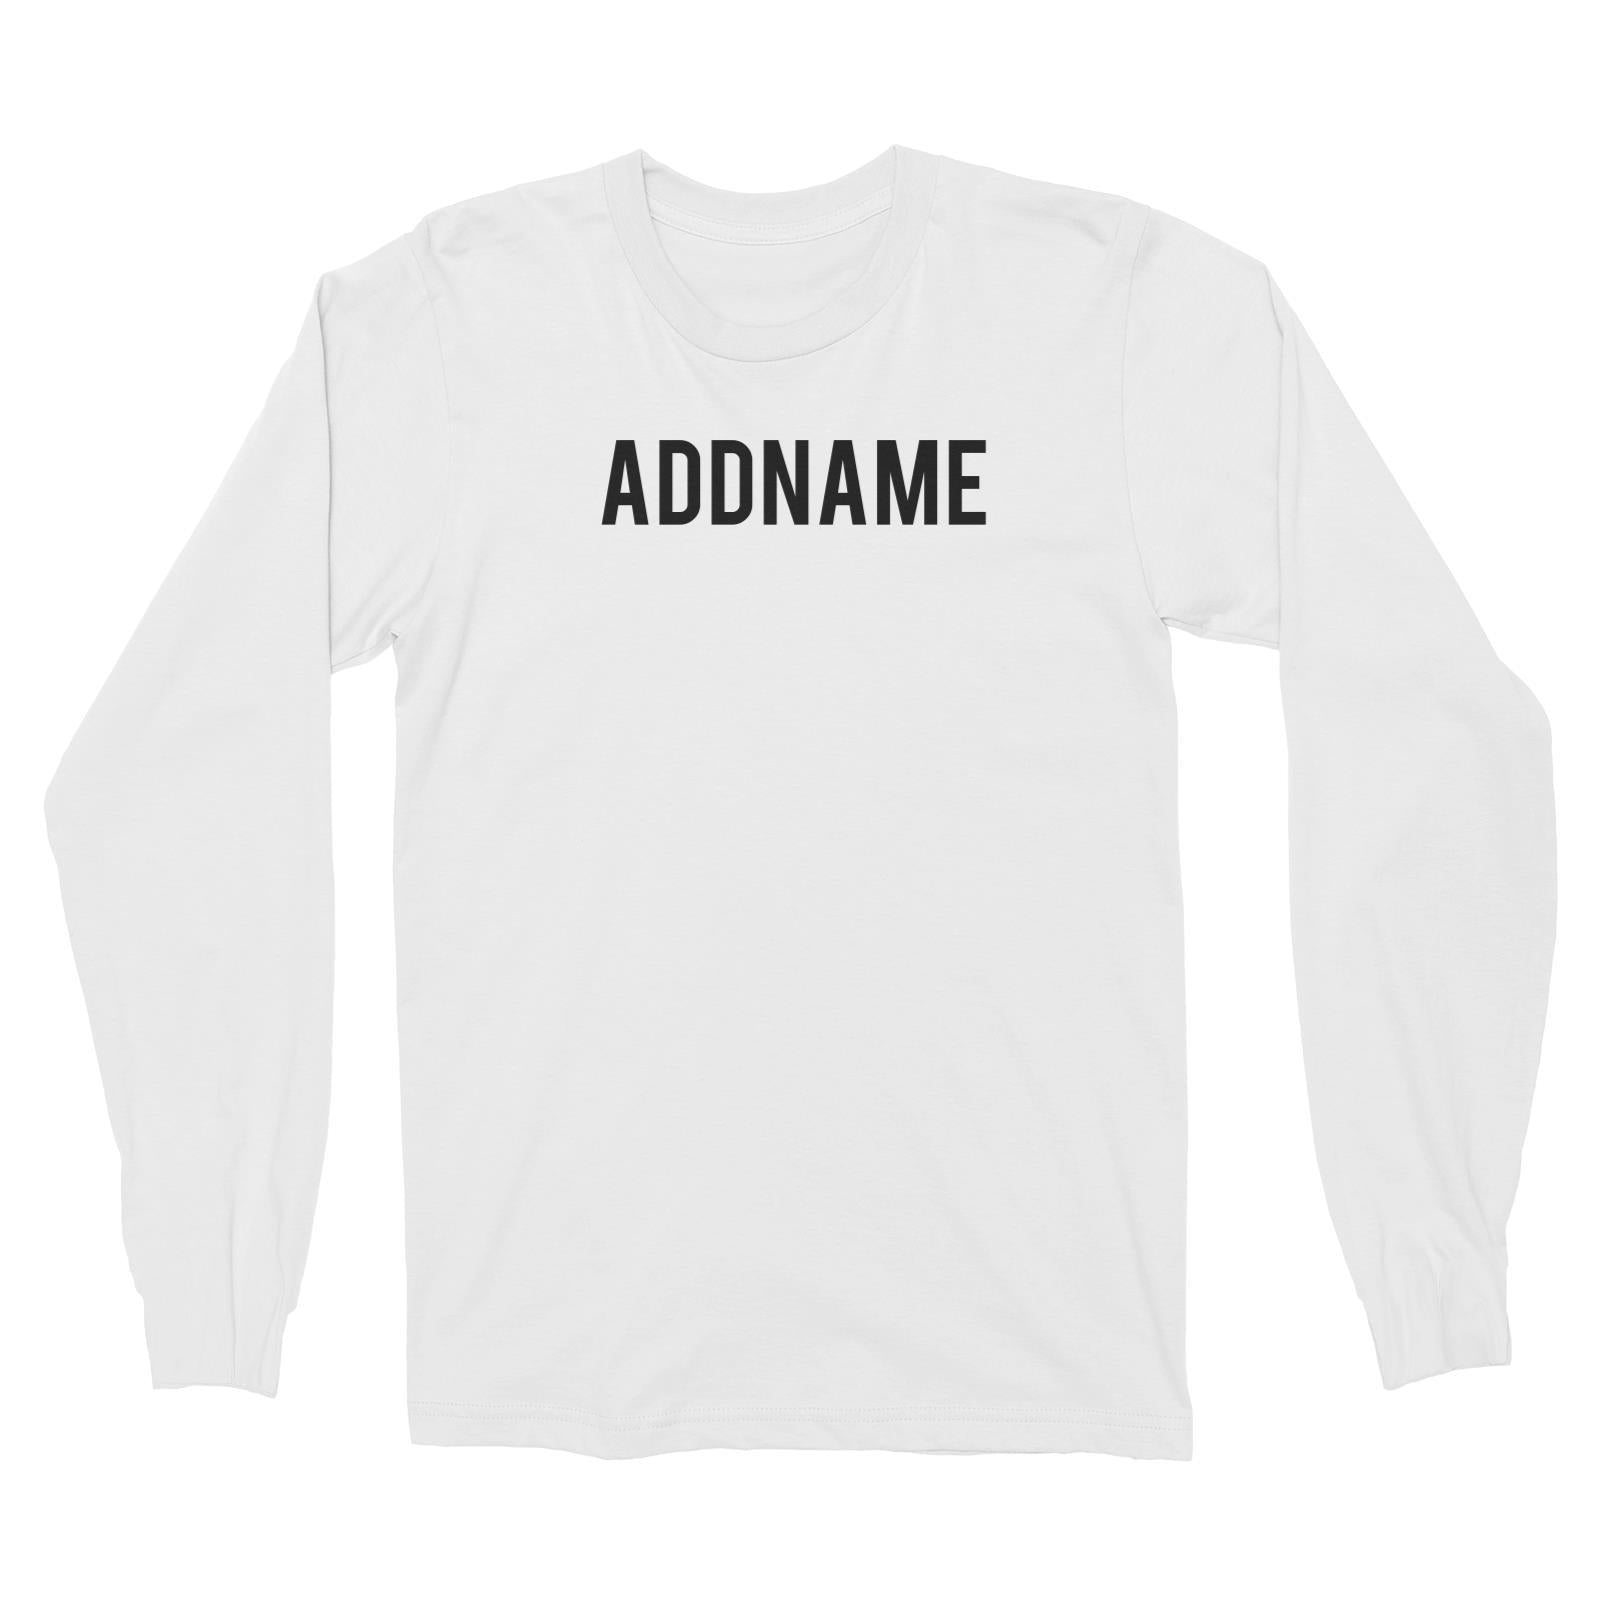 If Lost Return To Addname Original Long Sleeve Unisex T-Shirt